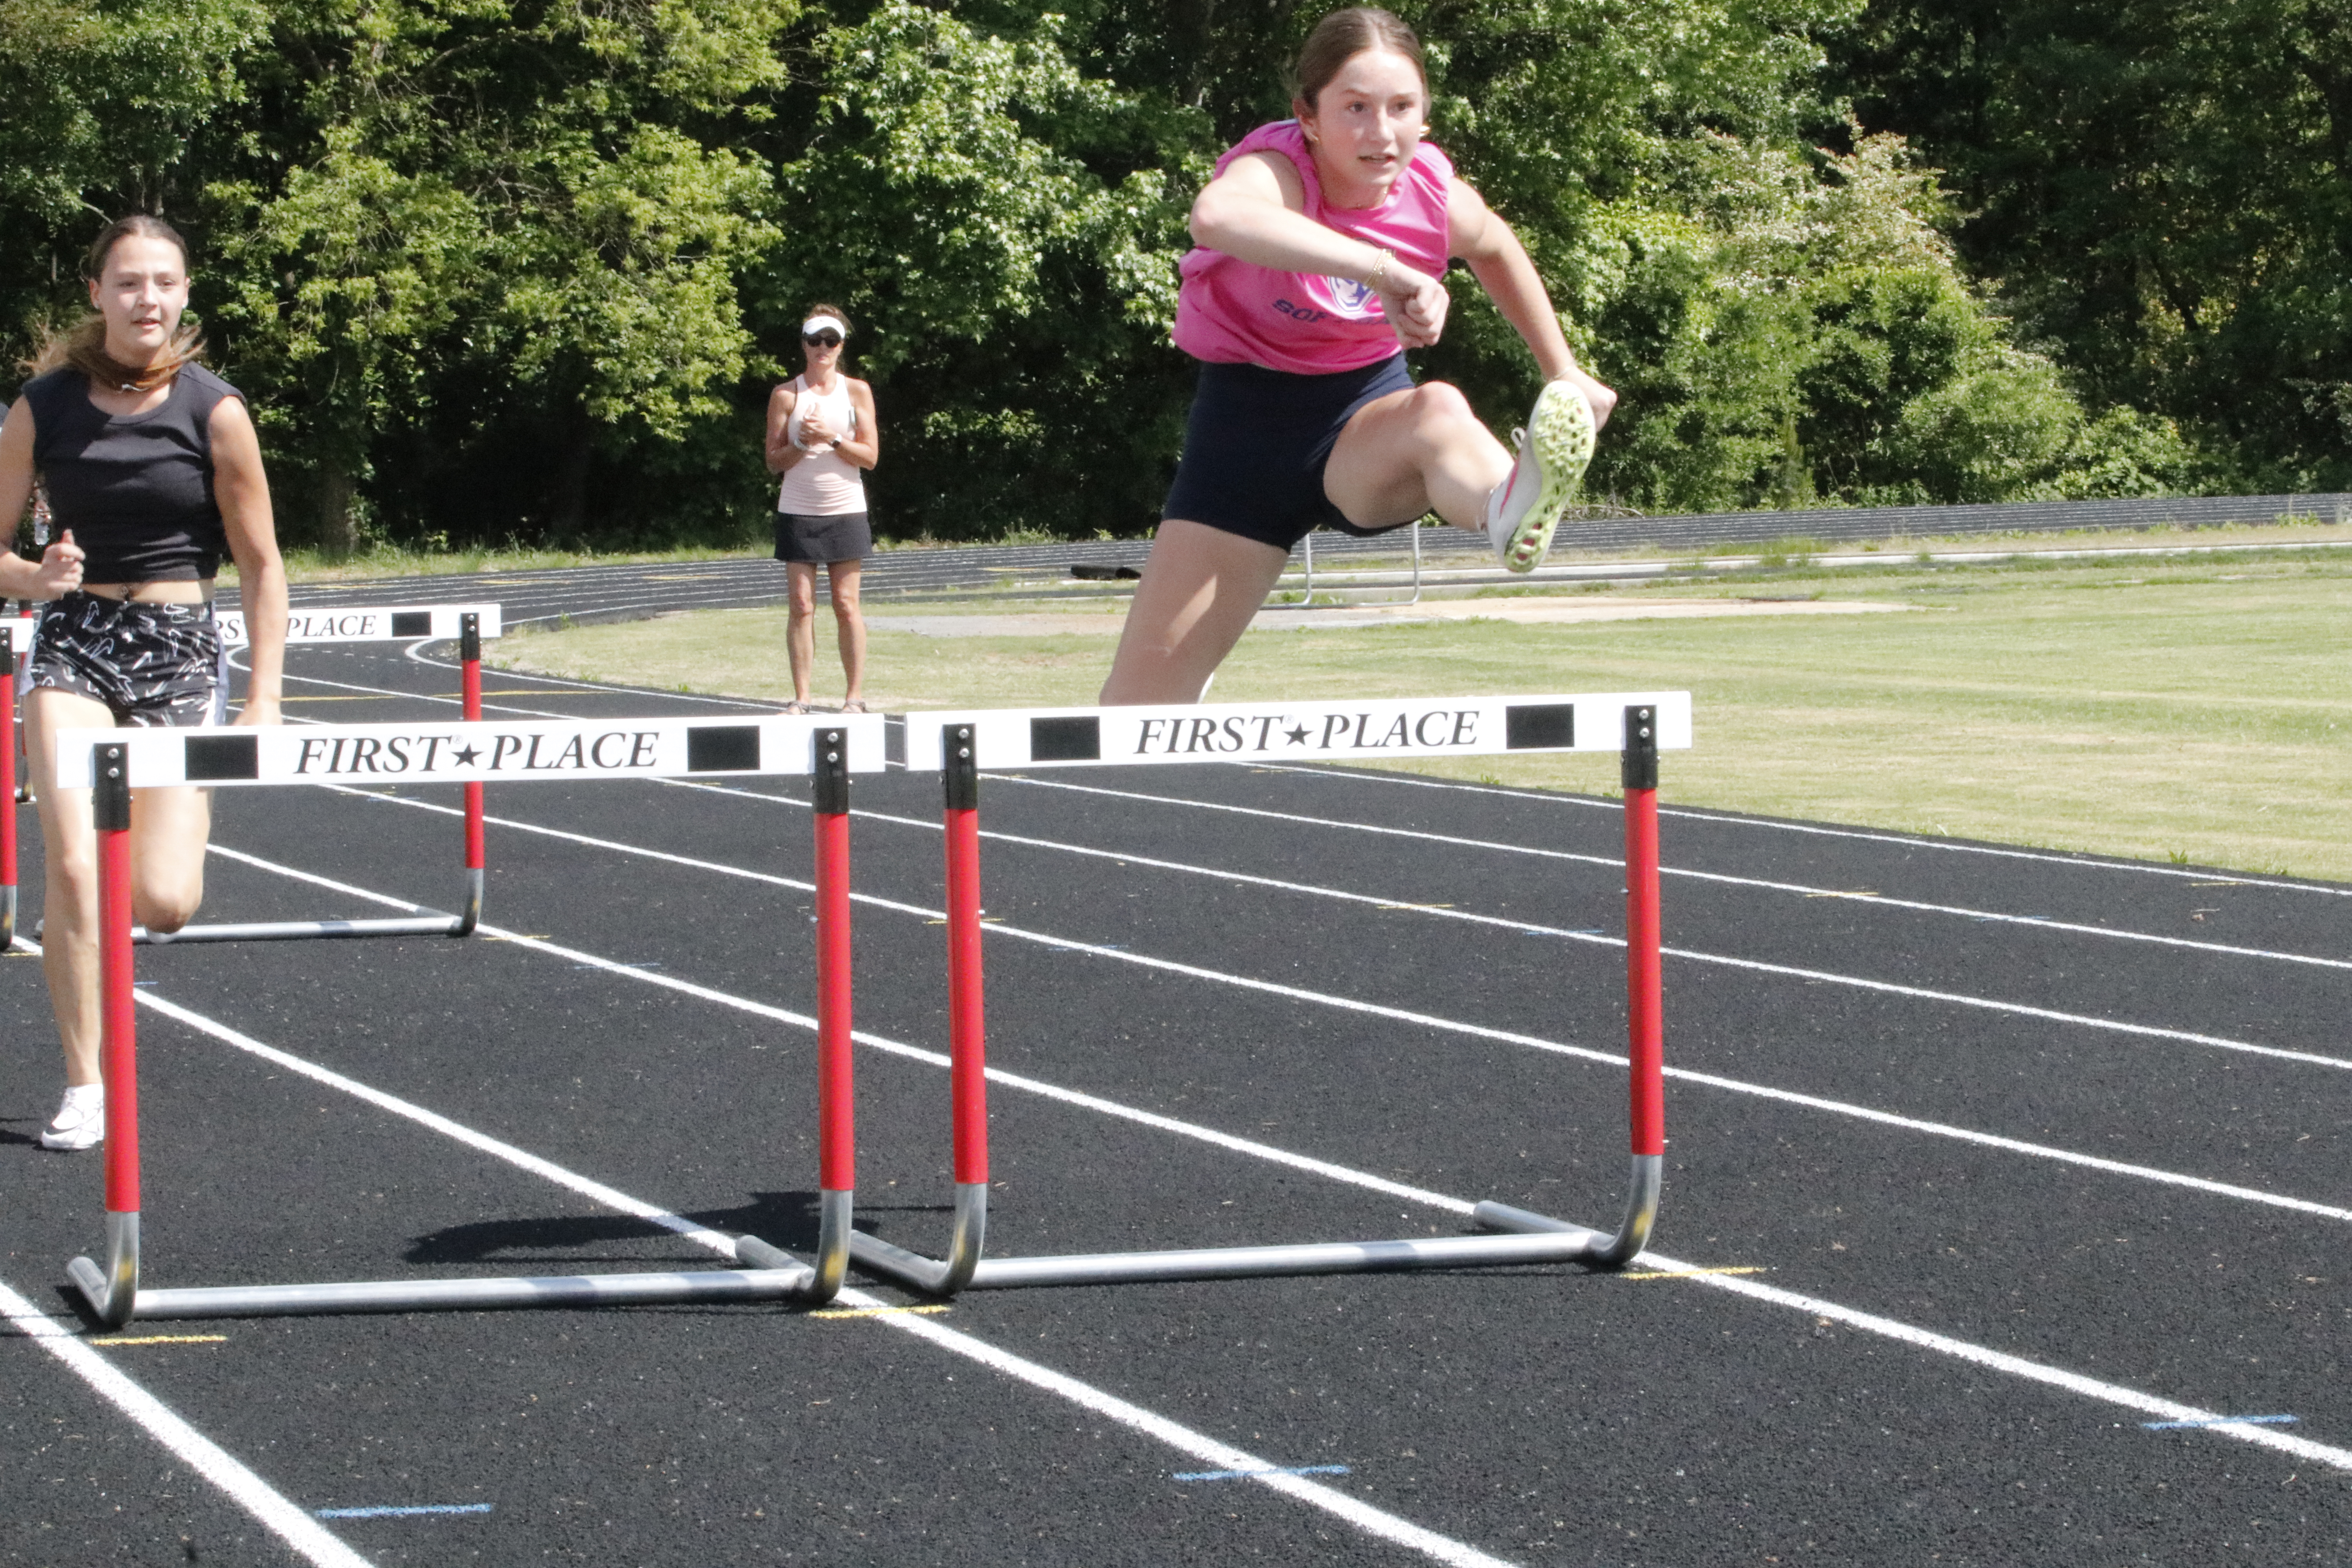 Turner's favorite event to compete in is the 100m hurdles. This year, Stoudenmire says that event has some of the toughest competition he has ever seen. (Torin Smith/The Oglethorpe Echo)